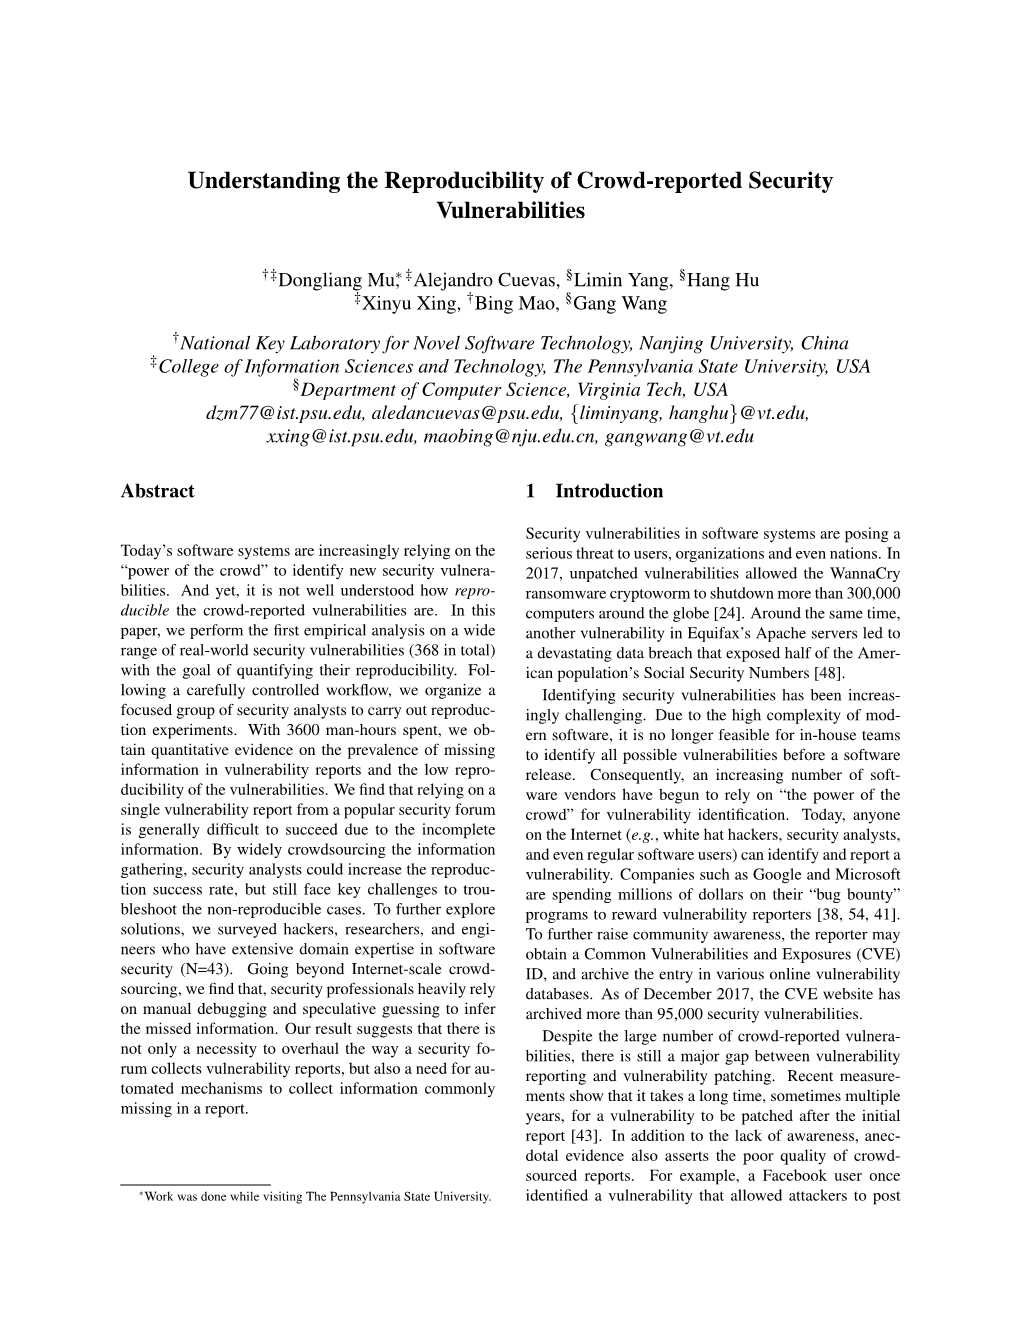 Understanding the Reproducibility of Crowd-Reported Security Vulnerabilities